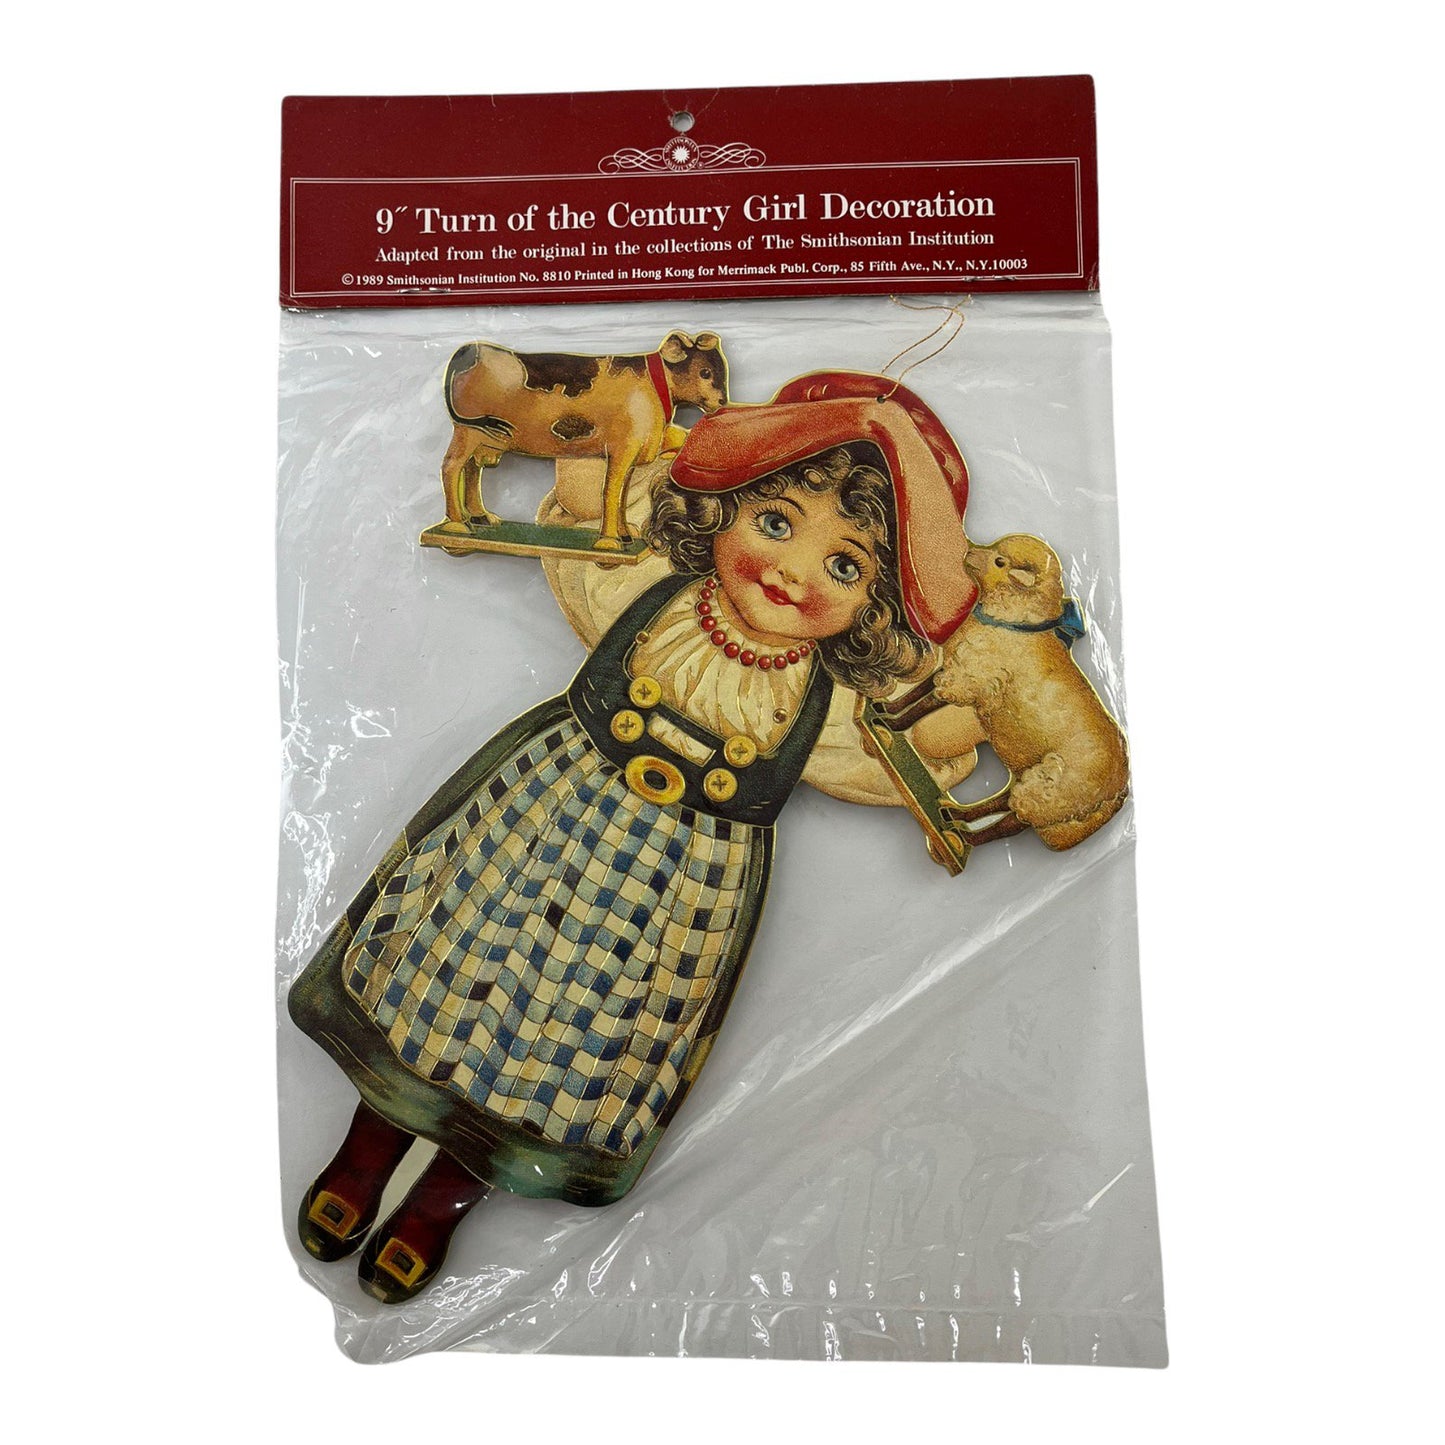 Turn of the Century Girl 9" Paper Decoration Vintage 1989